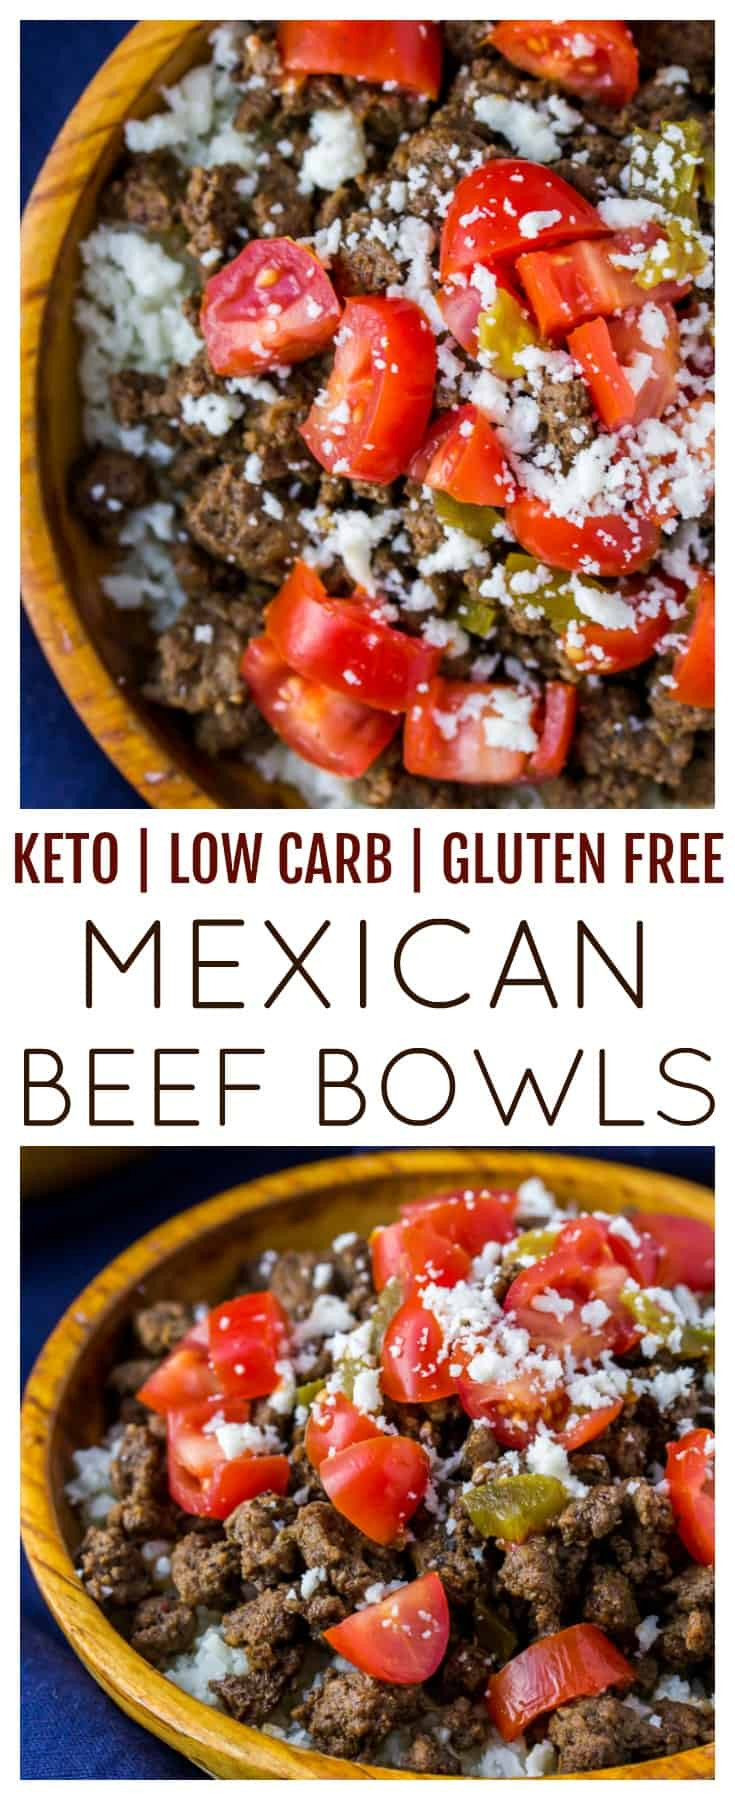 Mexican Keto Recipes Ground Beef
 Keto Mexican Beef Bowls Delicious Little Bites